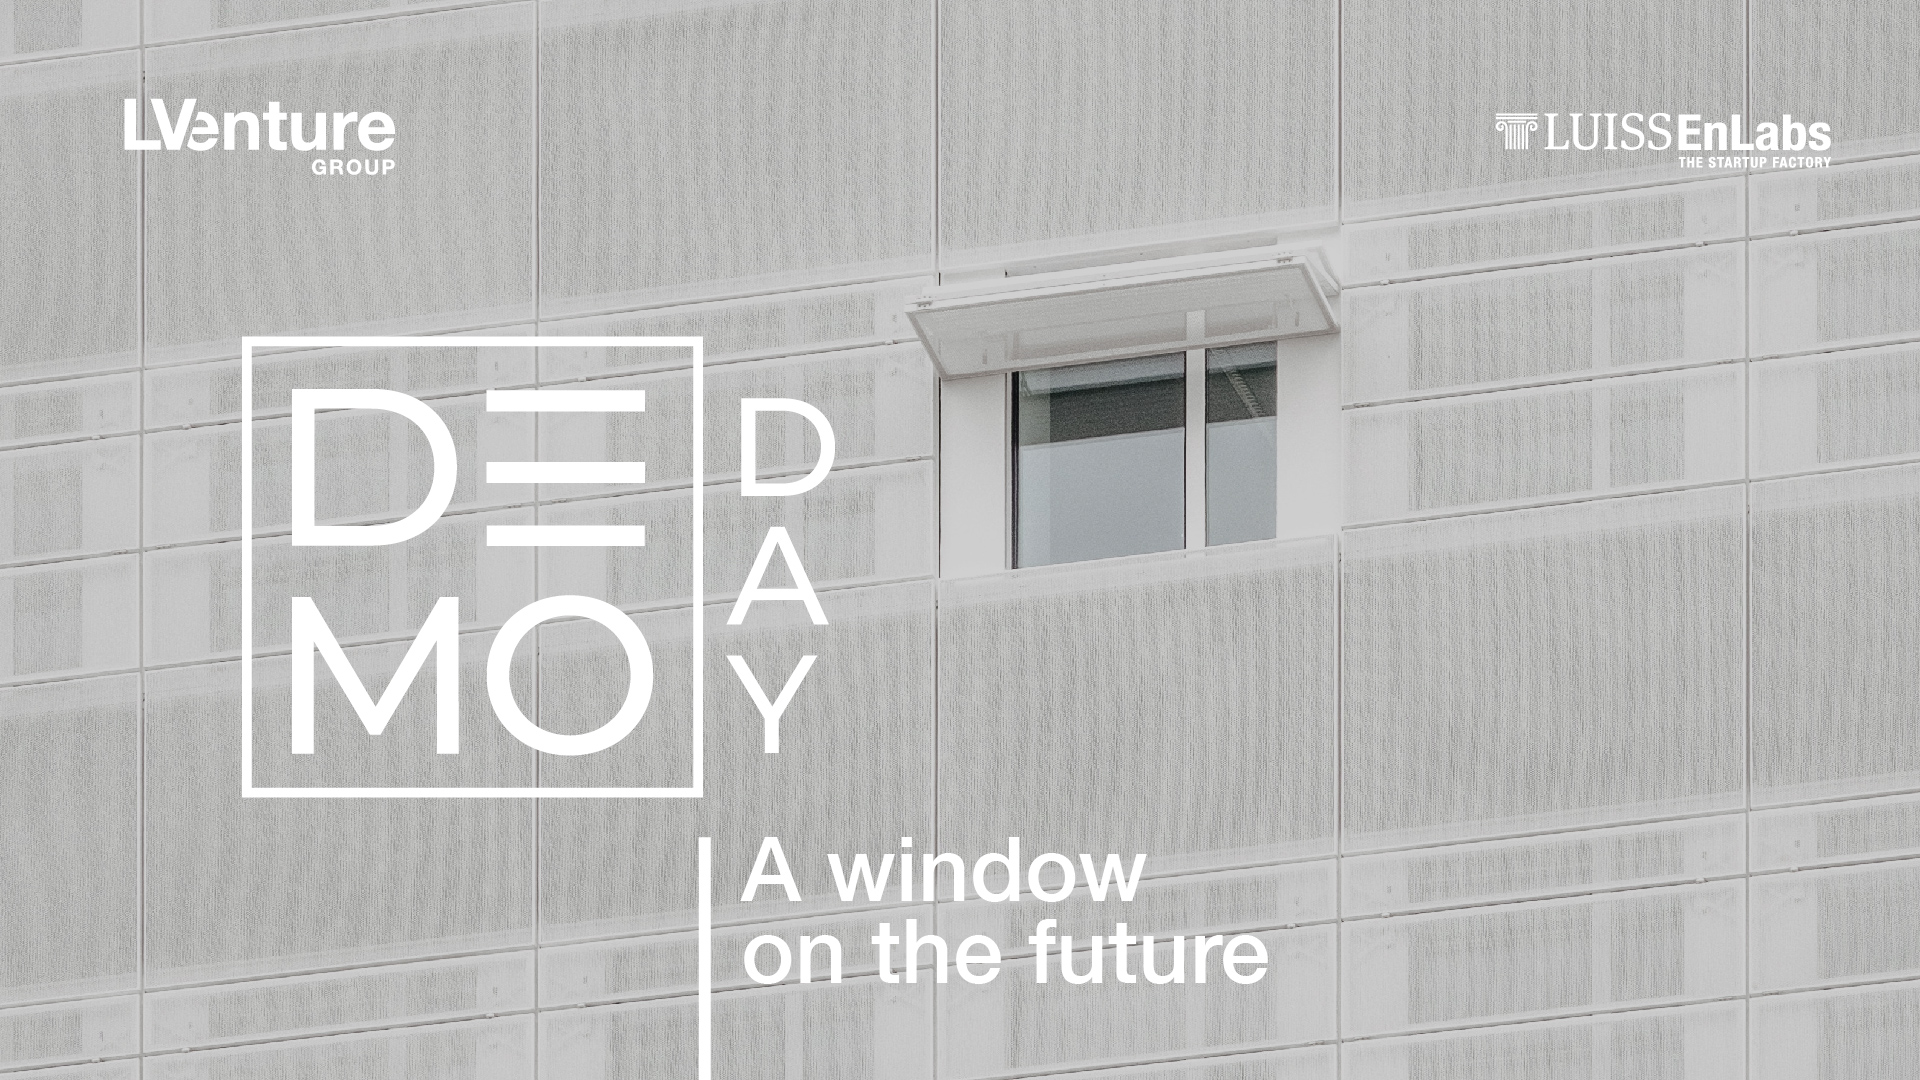 Demo Day: the window on the future was opened!